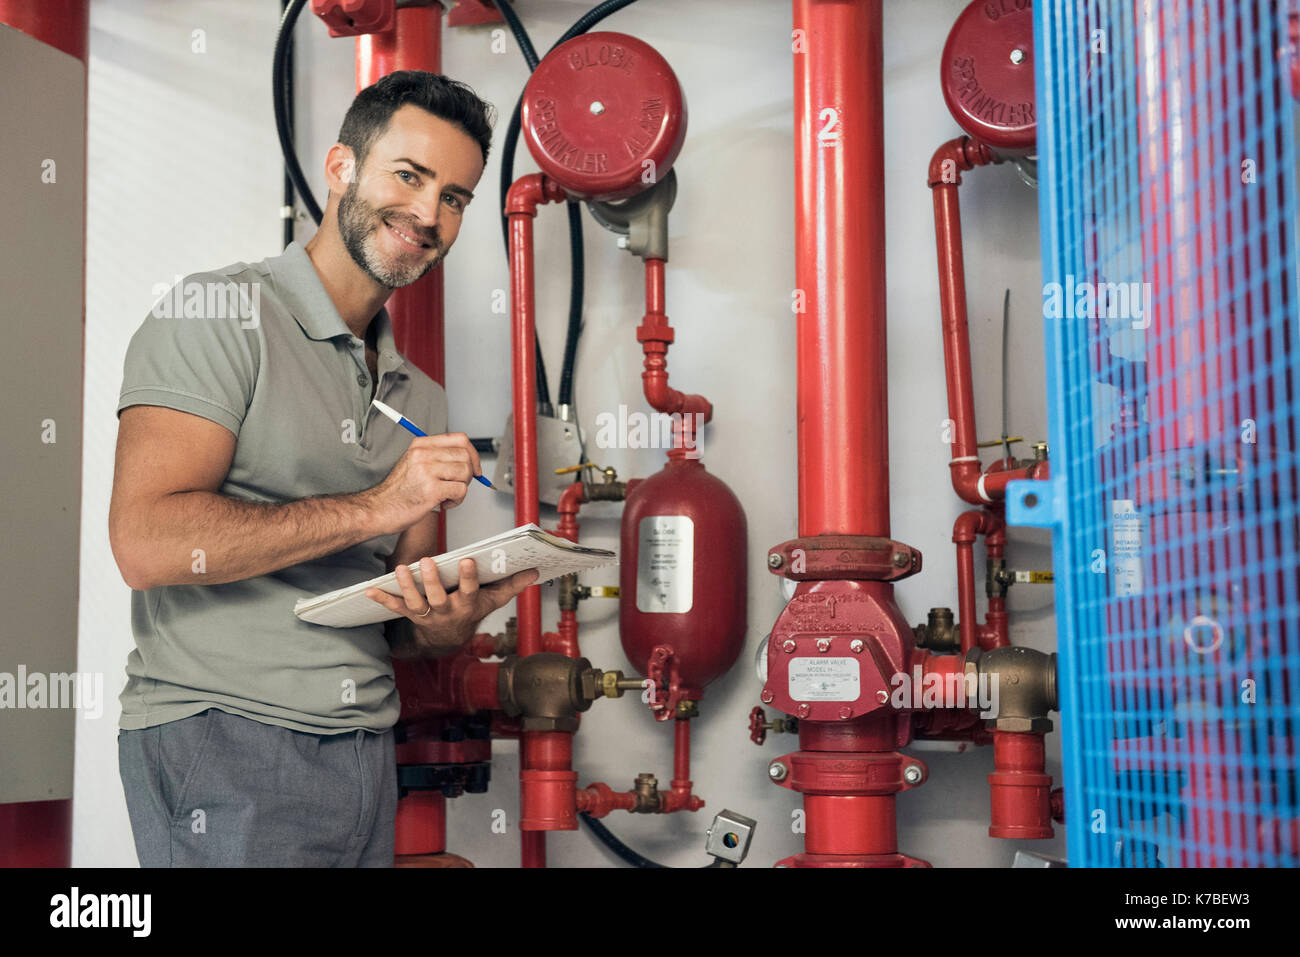 Man inspecting fire protection sprinkler system Stock Photo